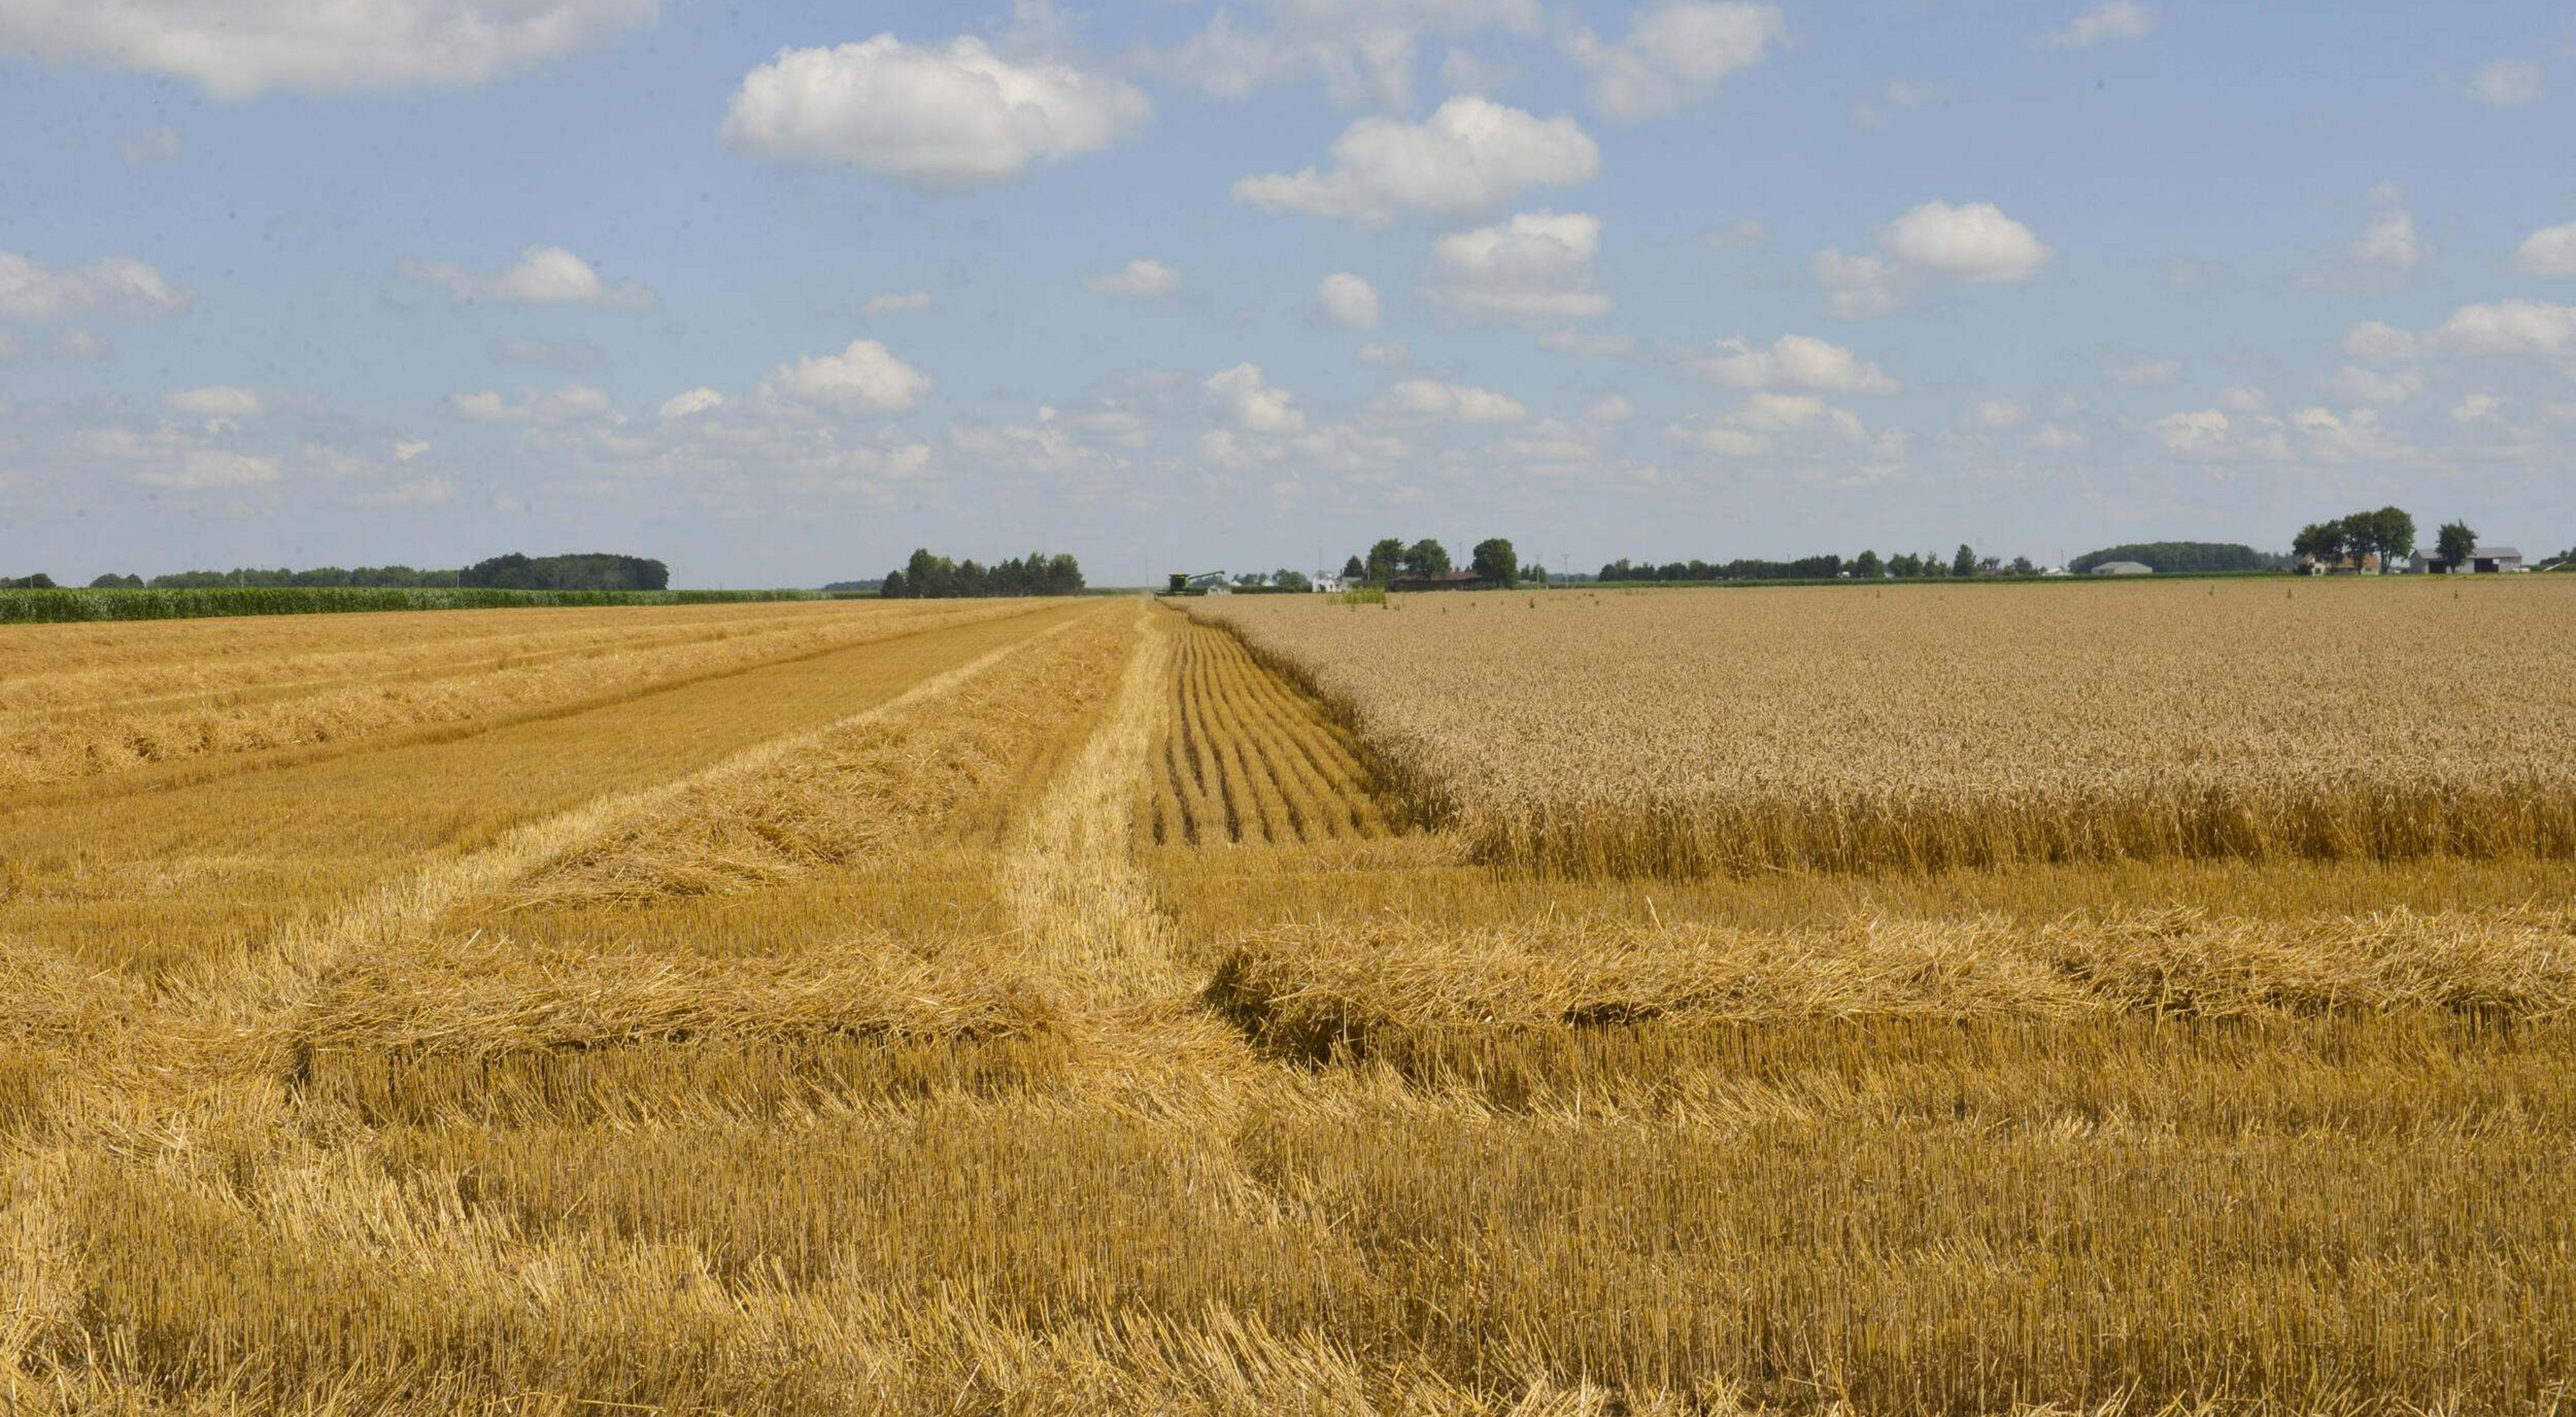 A partially harvested field of wheat under a pale blue sky that is dotted with clouds.